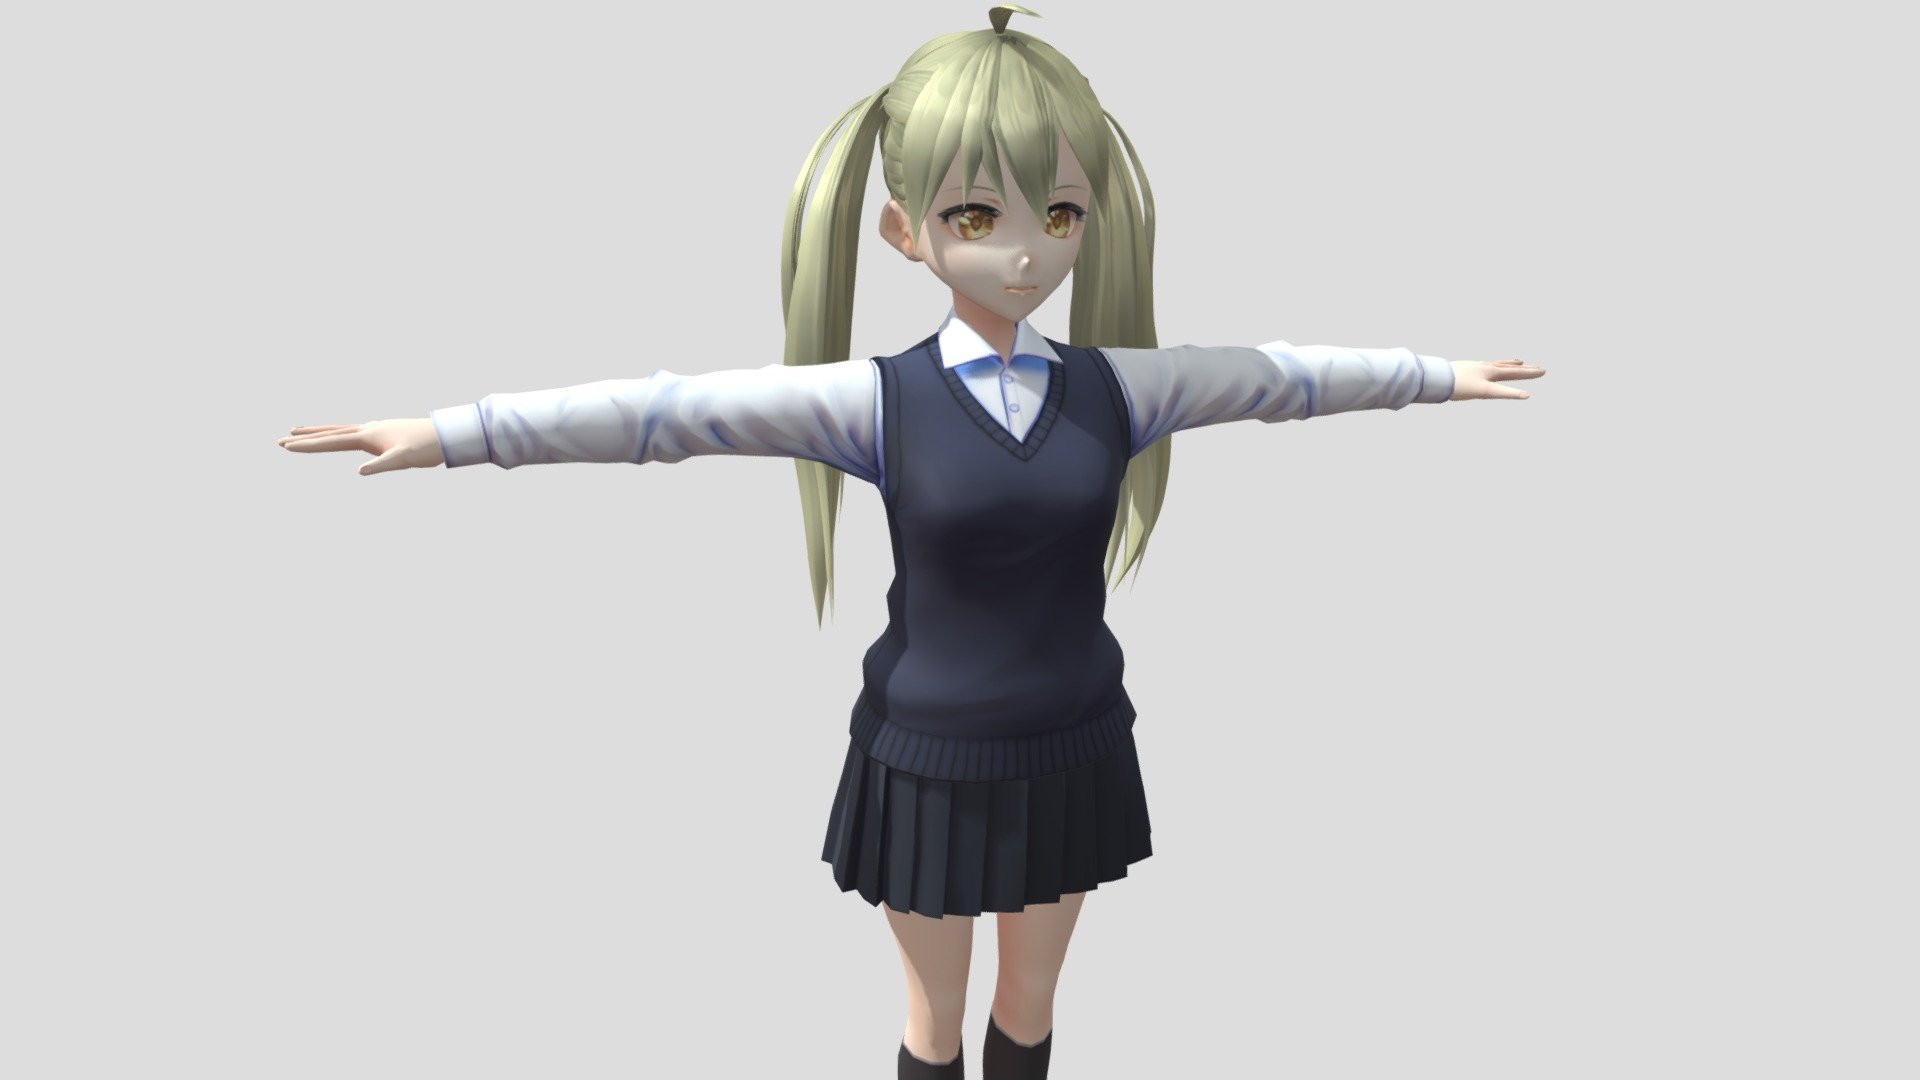 Model preview(Alex)

Model preview(Alice)



This character model belongs to Japanese anime style, all models has been converted into fbx file using blender, users can add their favorite animations on mixamo website, then apply to unity versions above 2019



Character : Alex / Alice

Verts:18457 / 19191

Tris:25532 / 26596

Fourteen textures for the character



This package contains VRM files, which can make the character module more refined, please refer to the manual for details



▶Commercial use allowed

▶Forbid secondary sales



Welcome add my website to credit :

Sketchfab

Pixiv

VRoidHub
 - 【Anime Character】Alex/Alice (V2/Unity 3D) - Buy Royalty Free 3D model by 3D動漫風角色屋 / 3D Anime Character Store (@alex94i60) 3d model